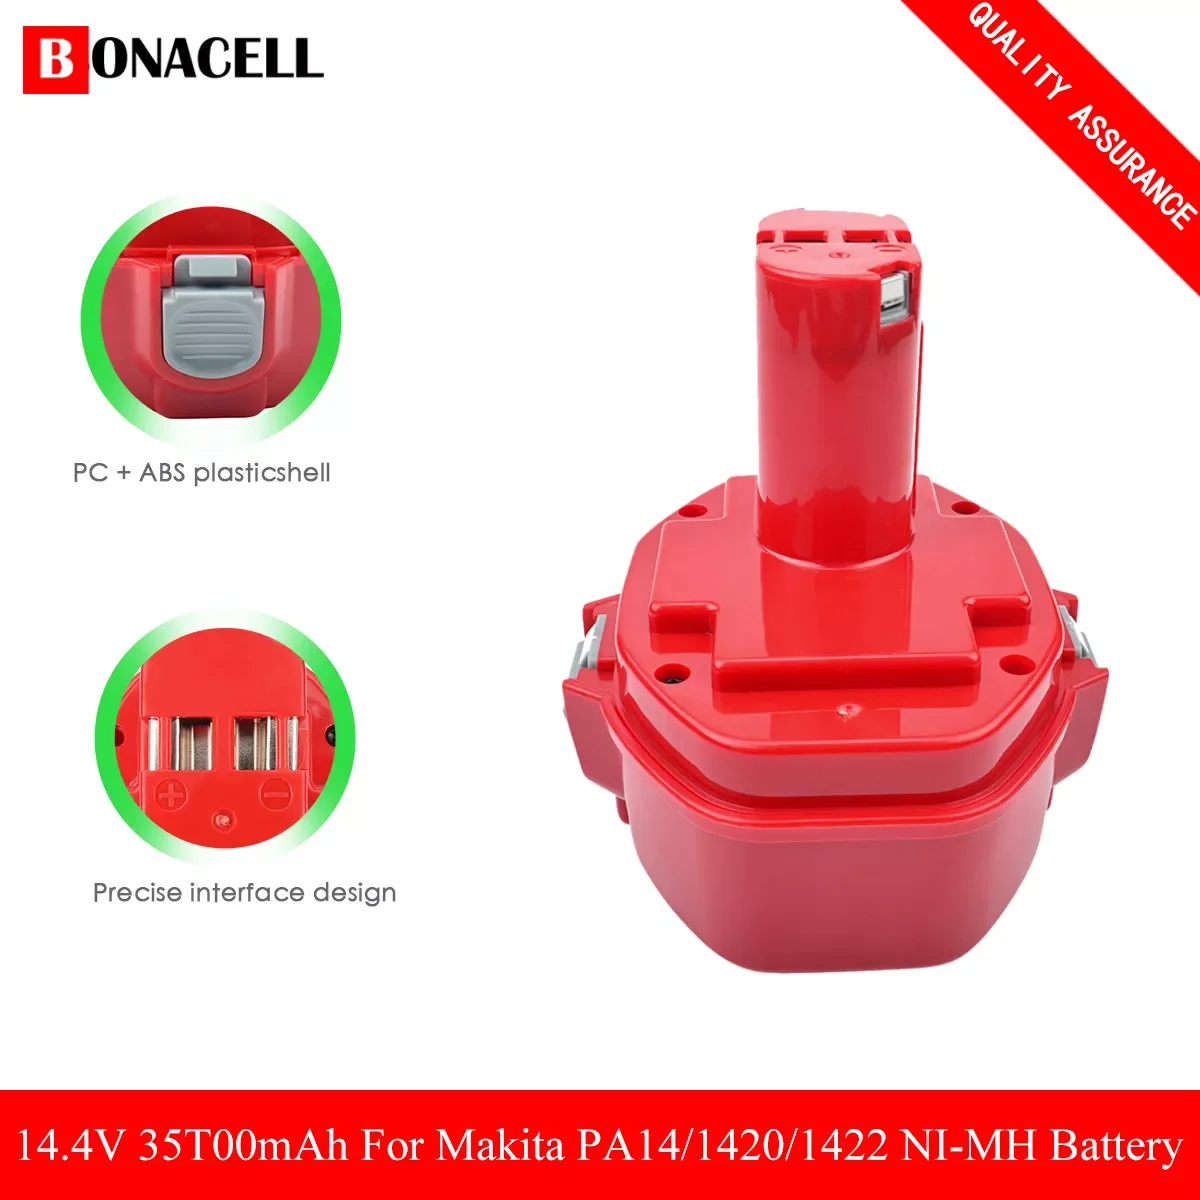 

Bonacell PA14 Power Tools Rechargeable Battery 3.5Ah NI-MH for Makita 14.4V Cordless Drills screwdriver Battery 1420 1433 1434